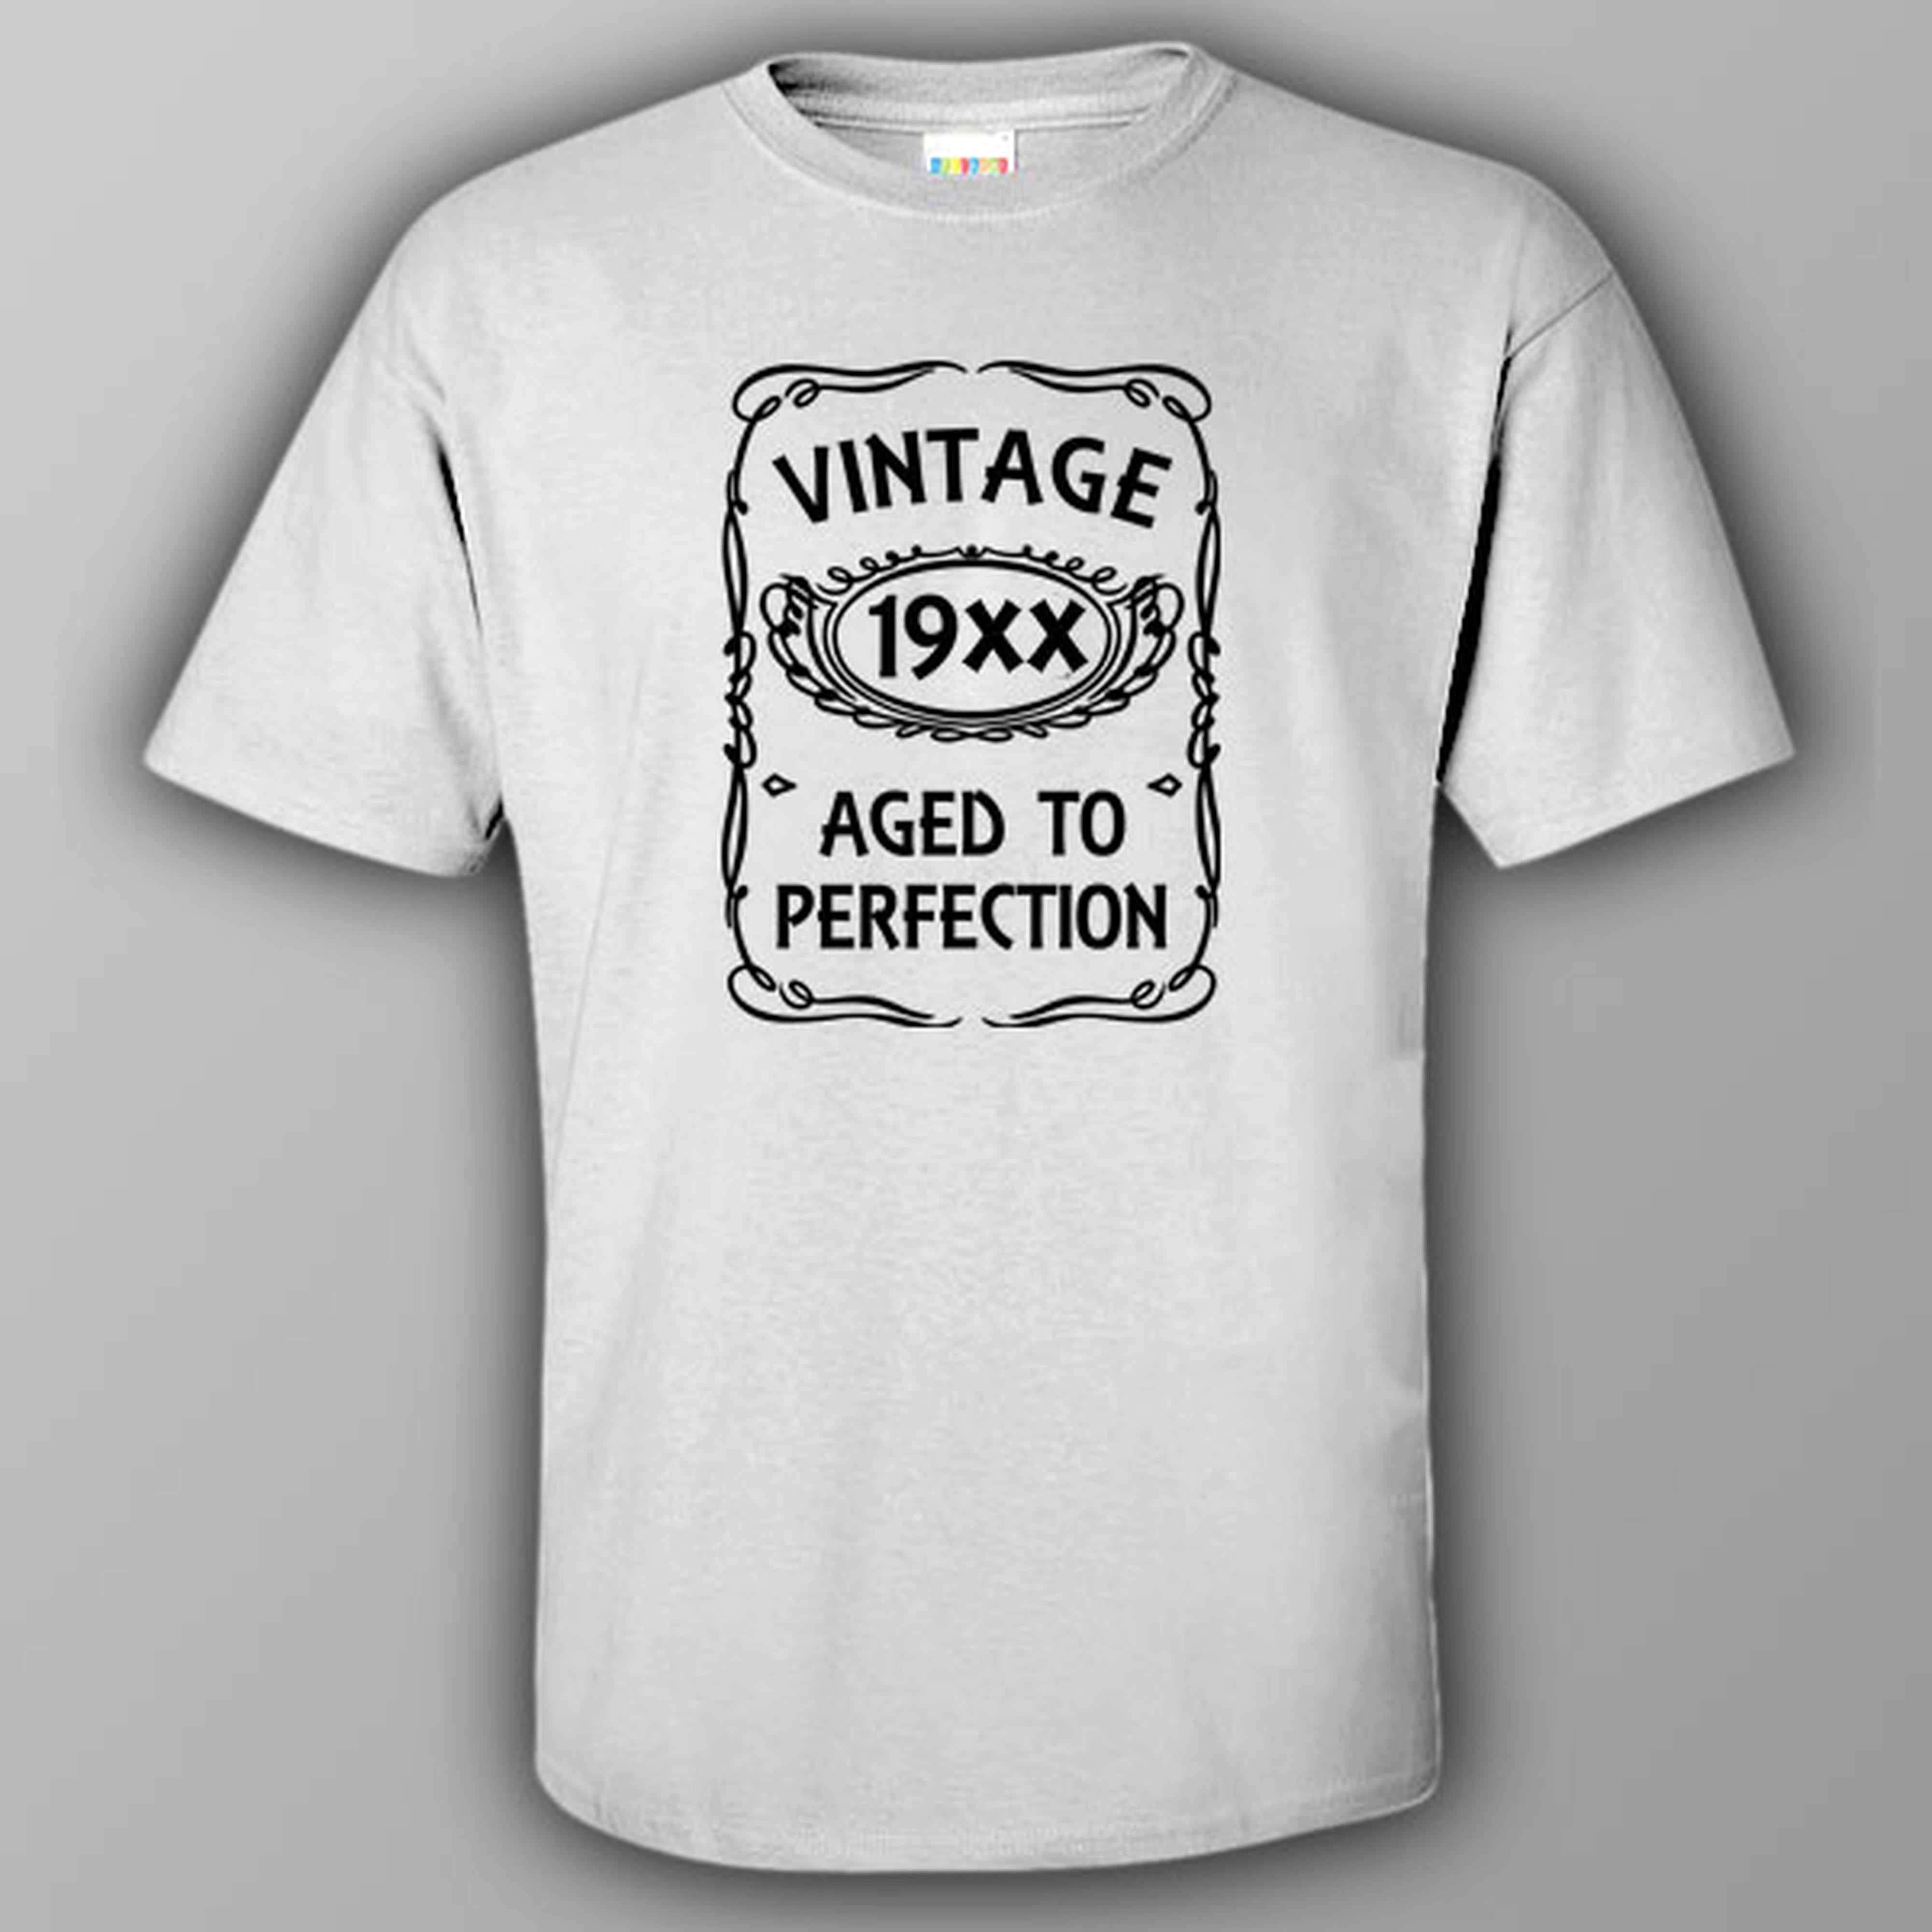 Vintage - ANY YEAR - Aged to perfection